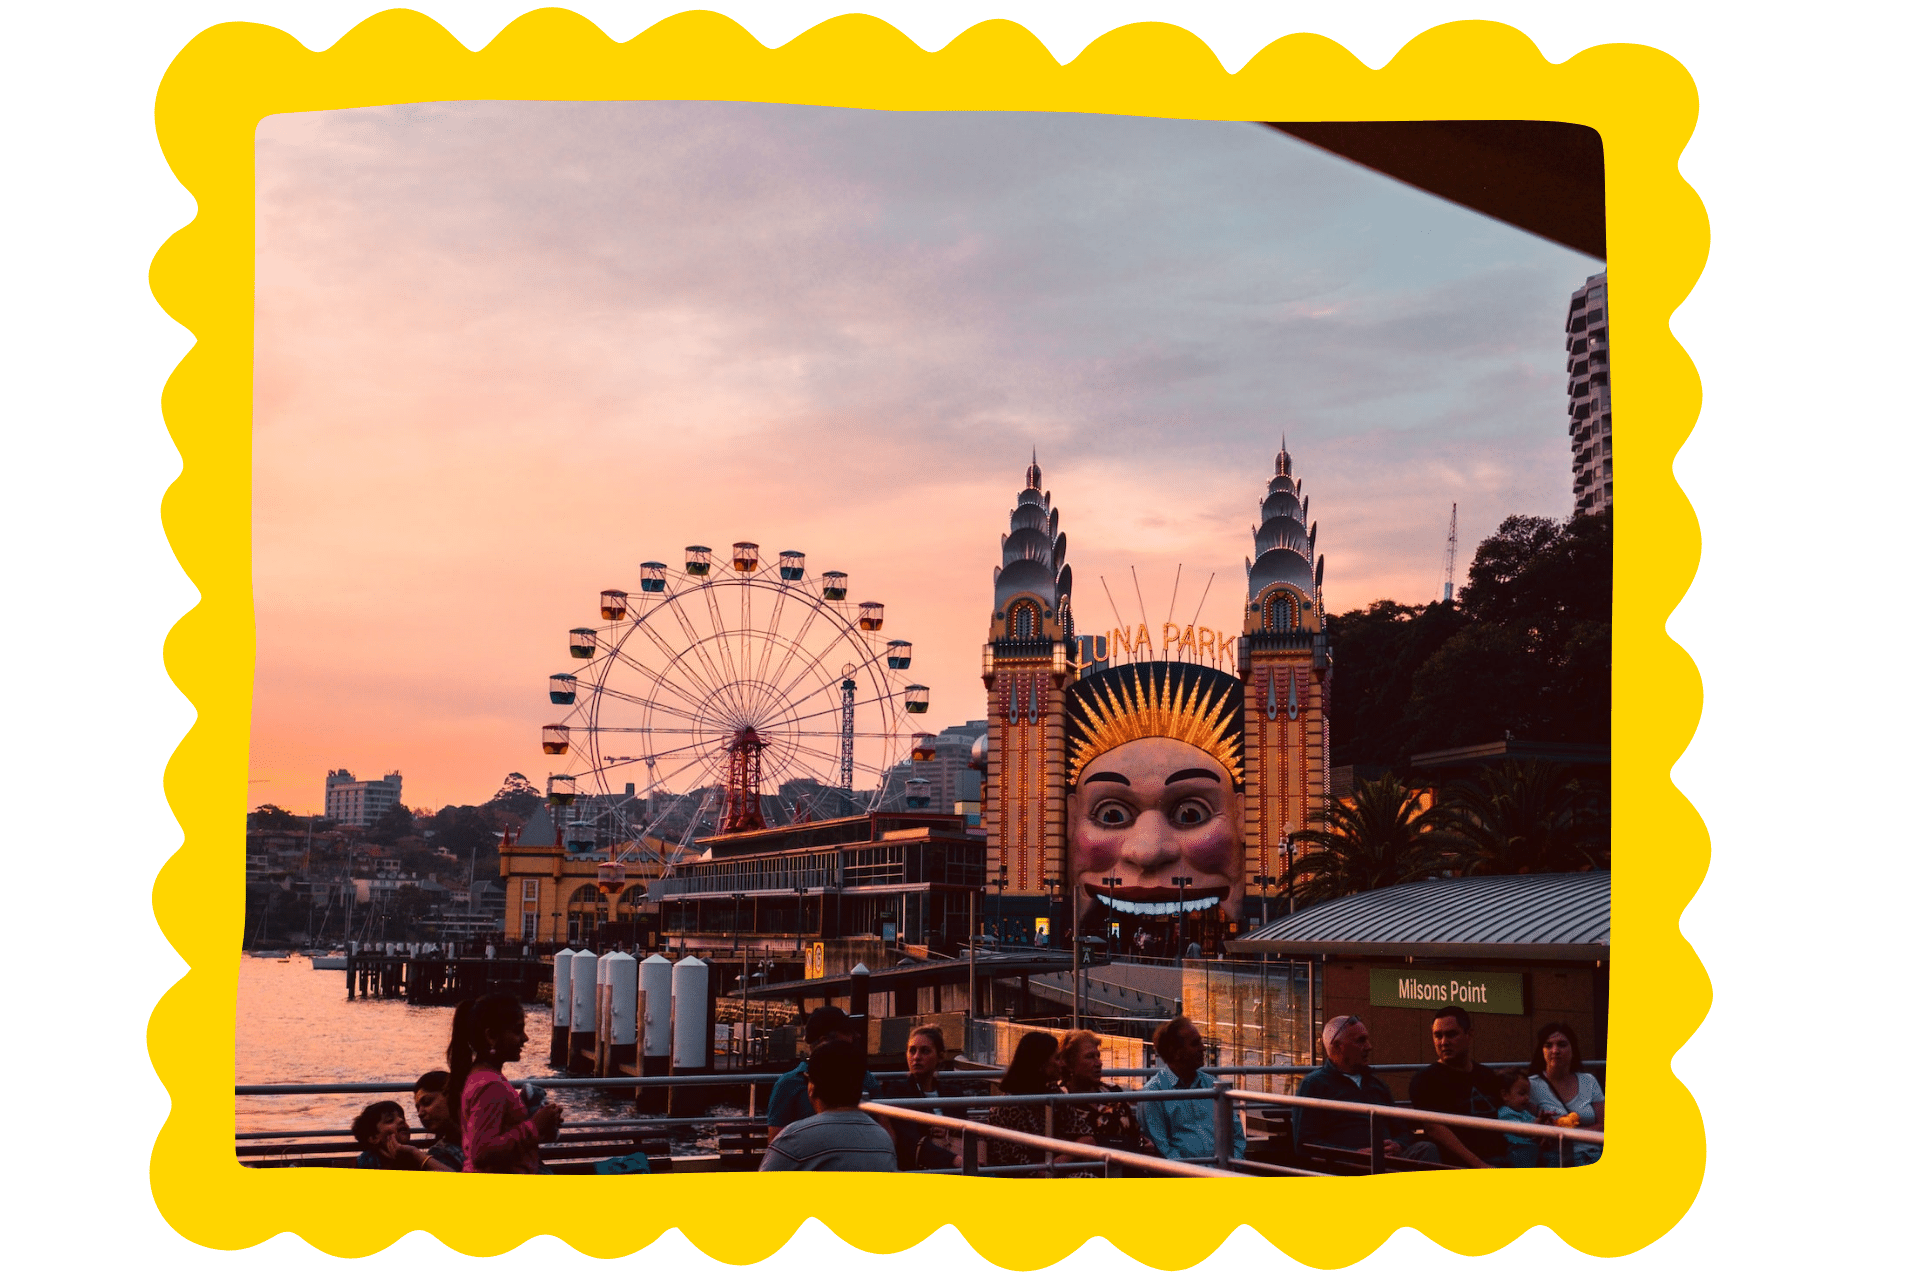 A fairground at sunset, with illuminations and a Ferris wheel.